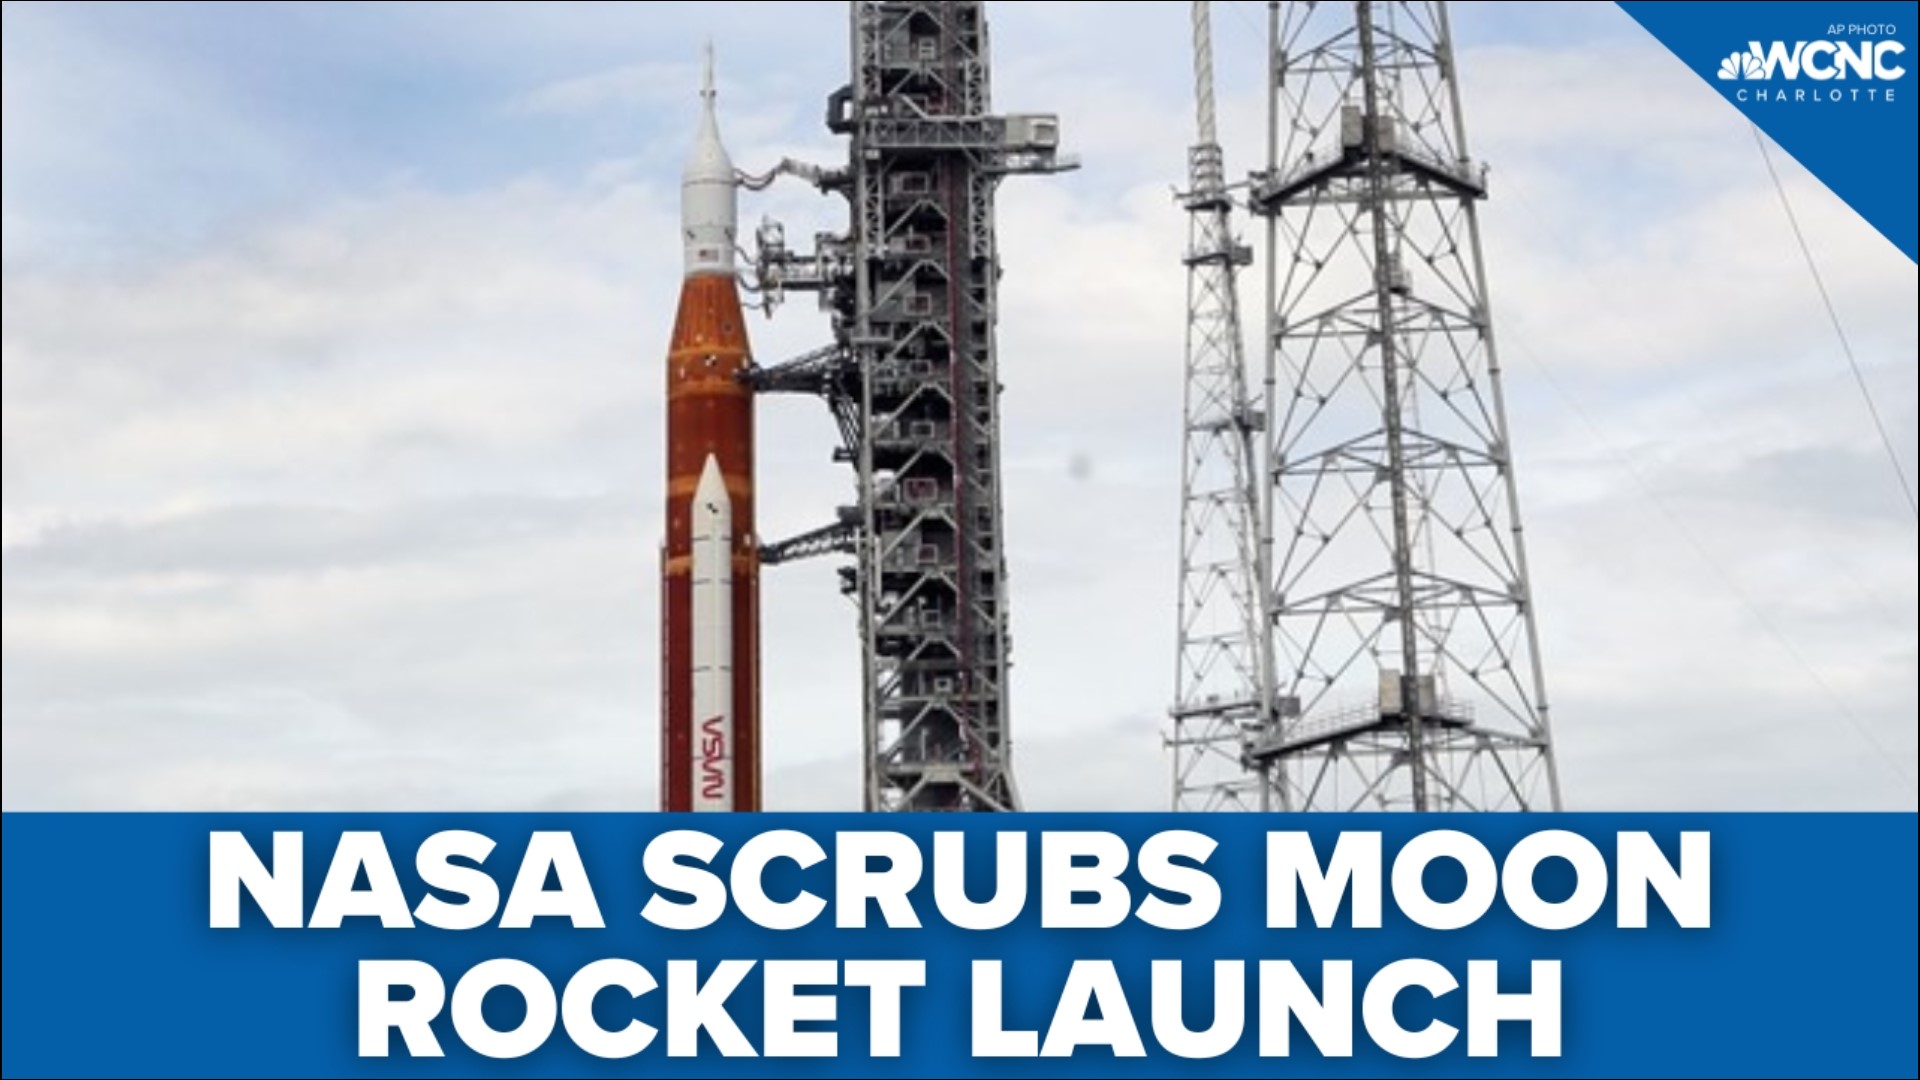 The Artemis-1 rocket launch attempt got scrubbed early Monday morning. NASA called off the highly anticipated moon rocket launch due to an engine issue.